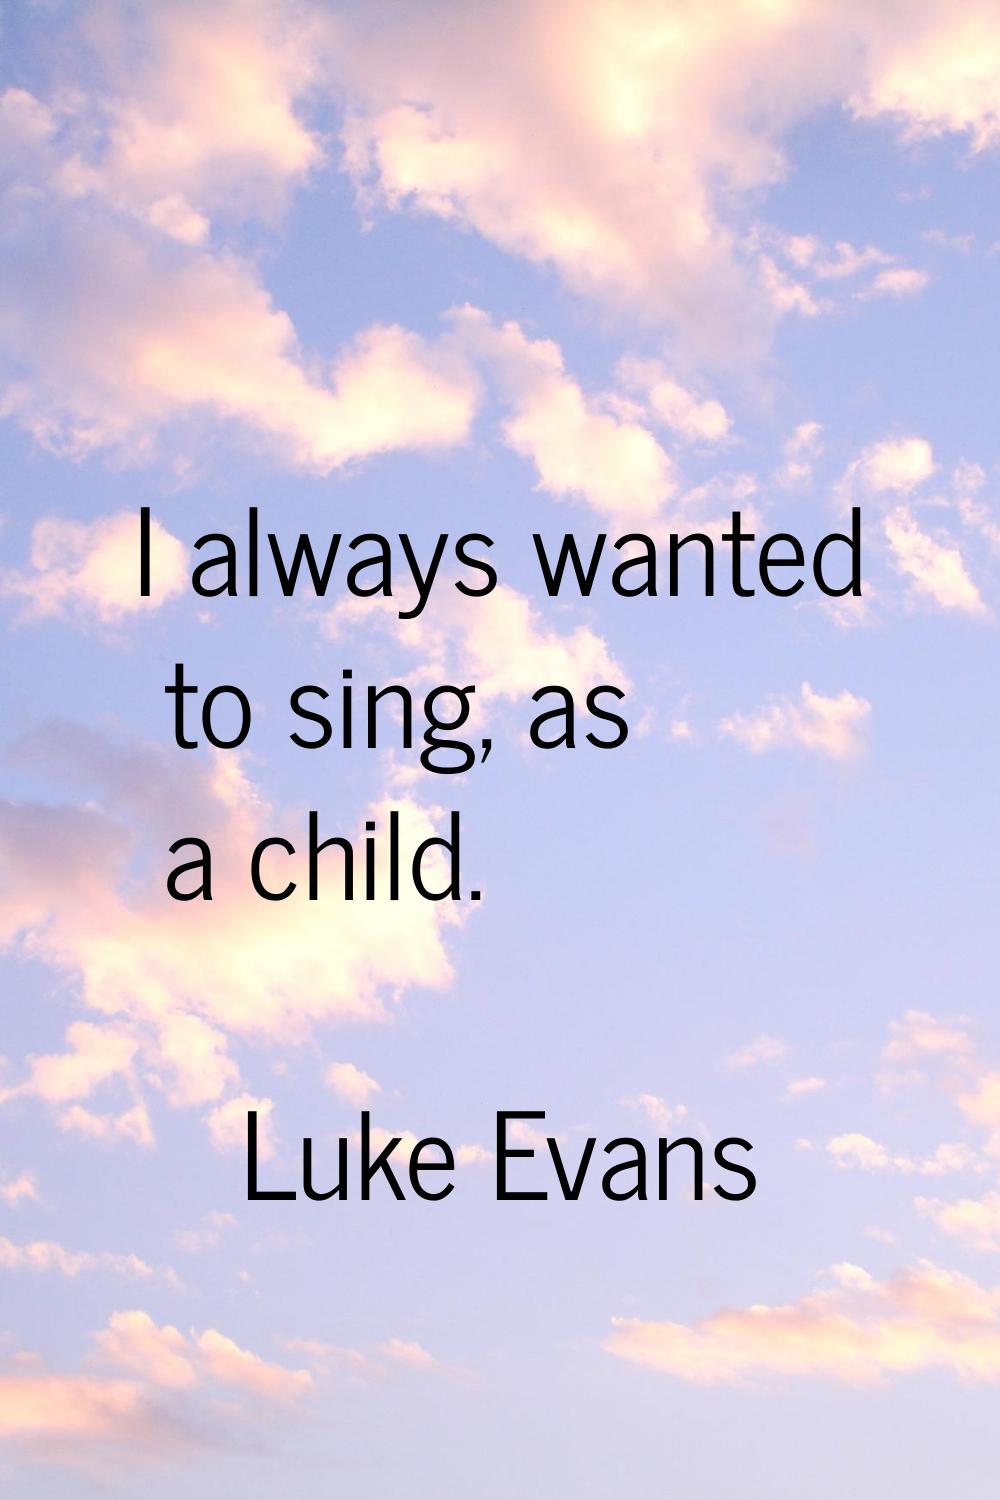 I always wanted to sing, as a child.